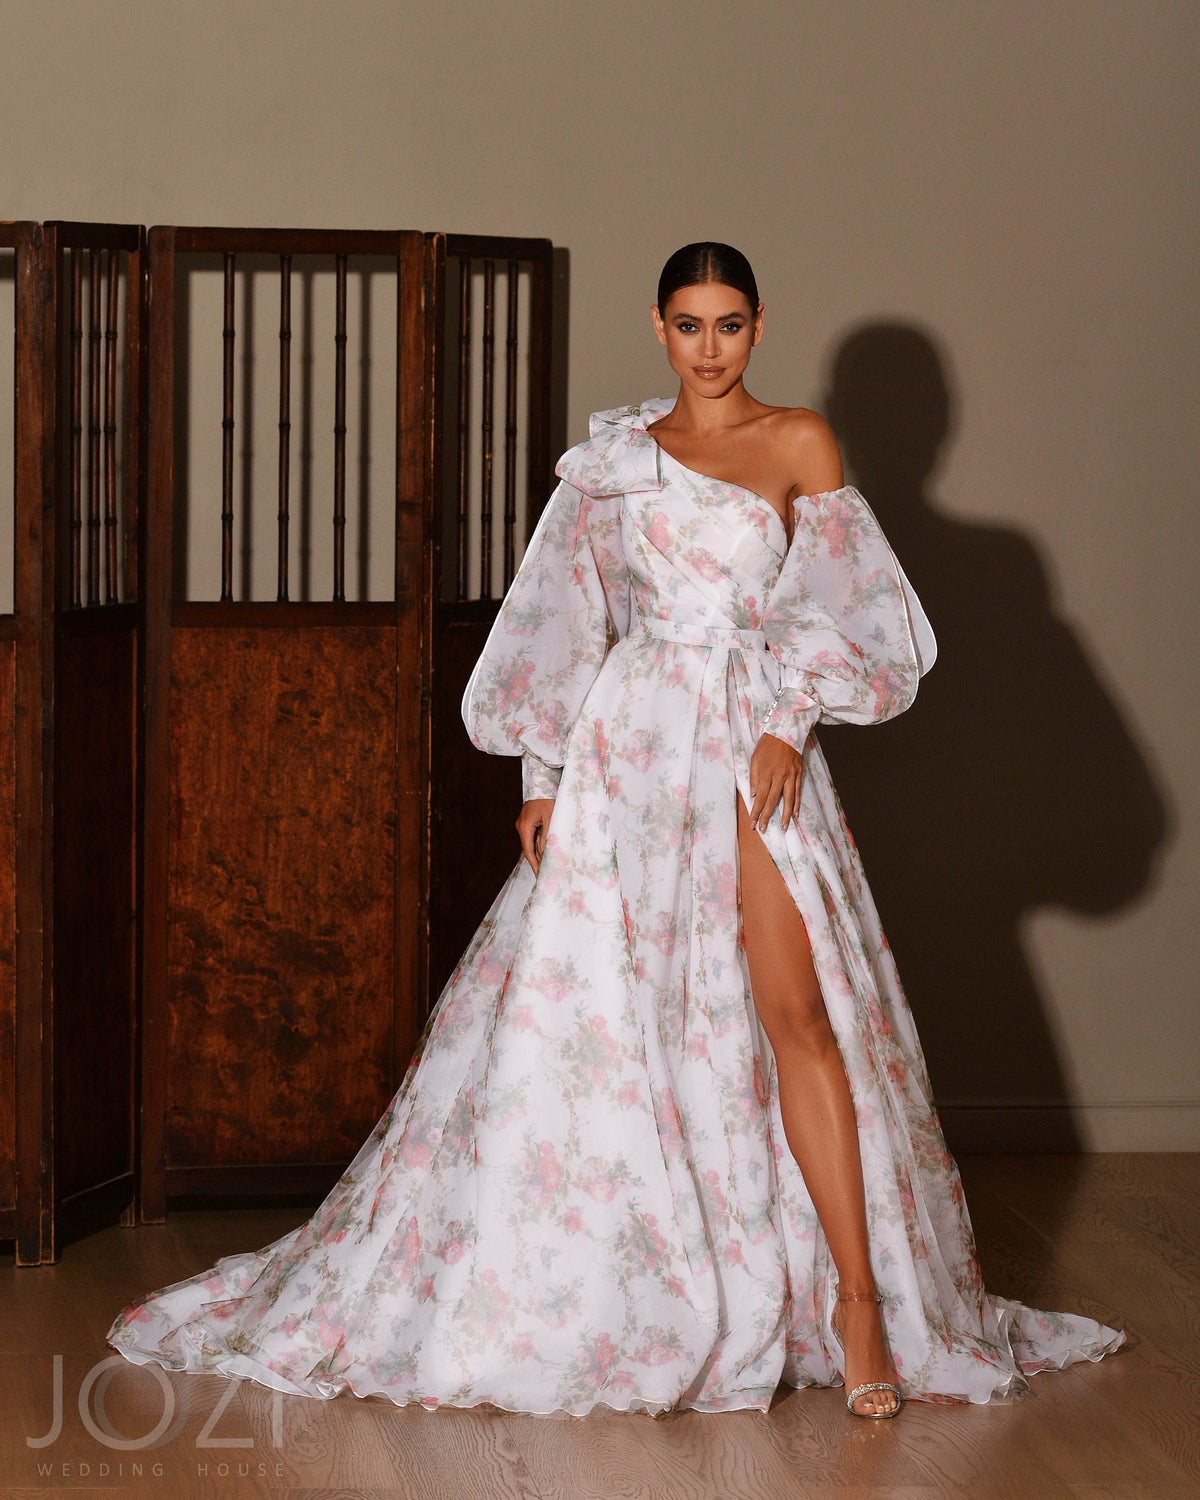 Floral Print ALine Asymmetrical Off The Shoulder Long Sleeve Open Back Wedding Dress Bridal Gown Side Thigh Slit with Train Unique